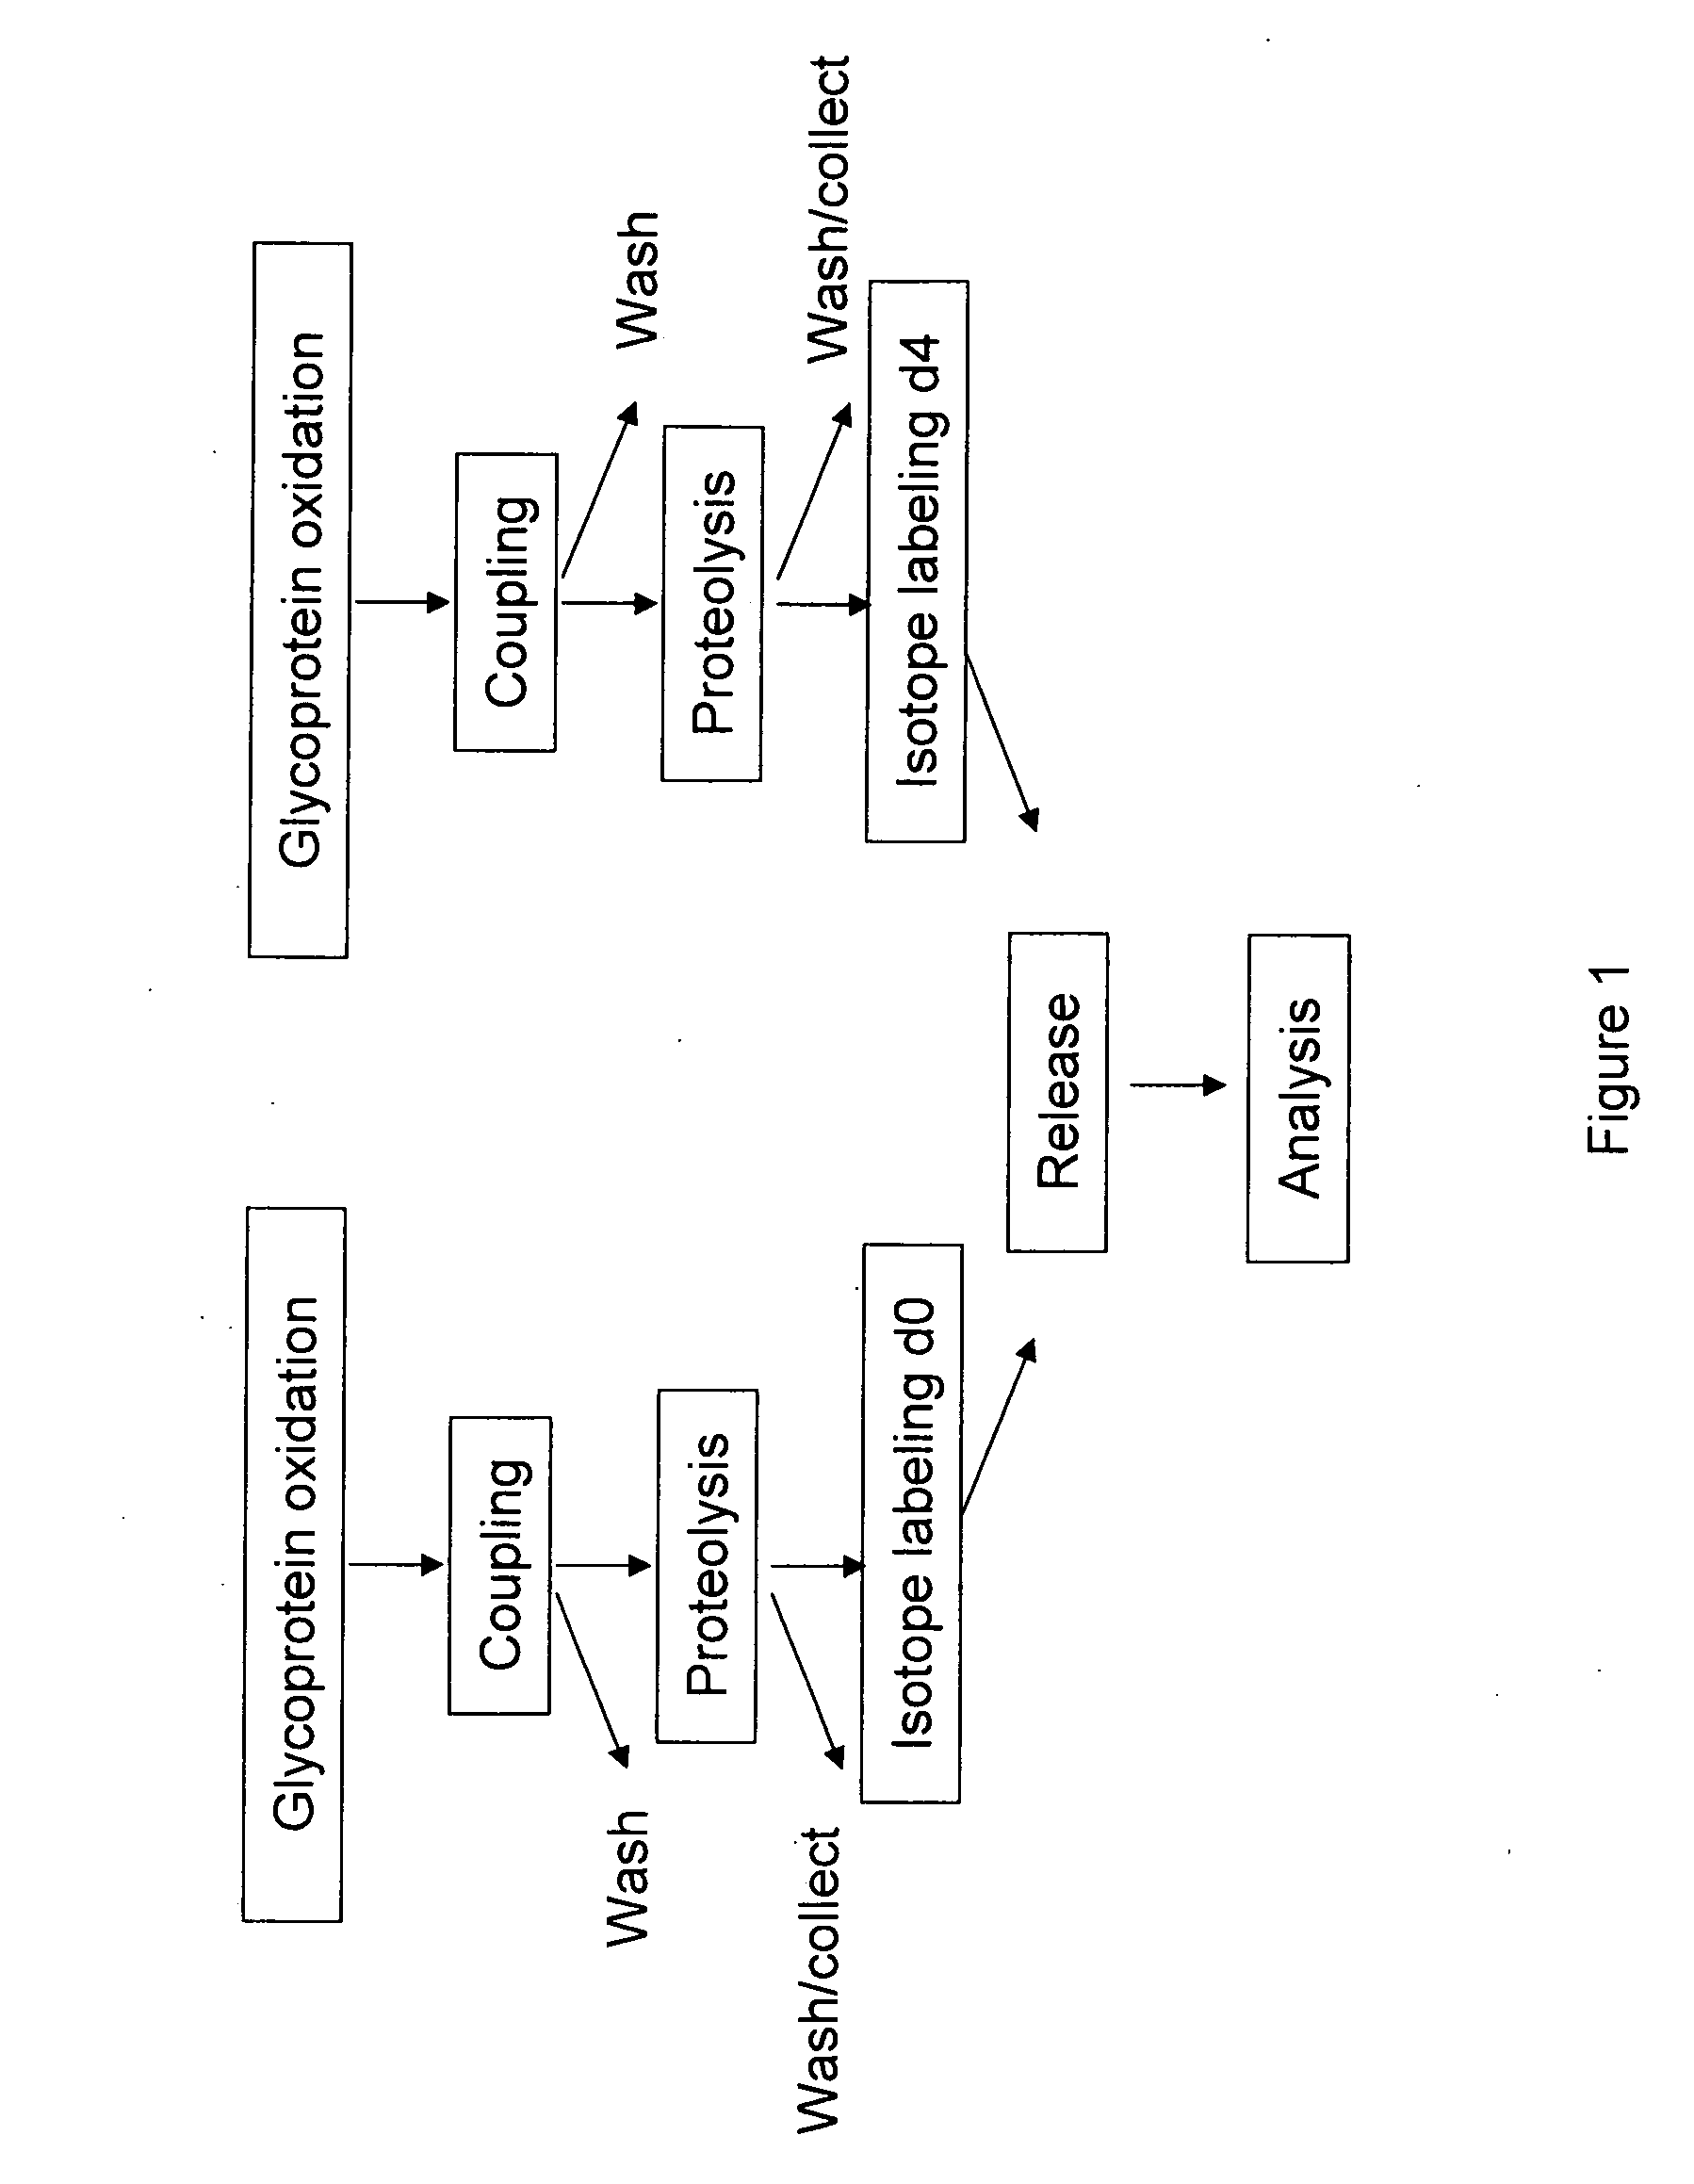 Methods for quantitative proteome analysis of glycoproteins